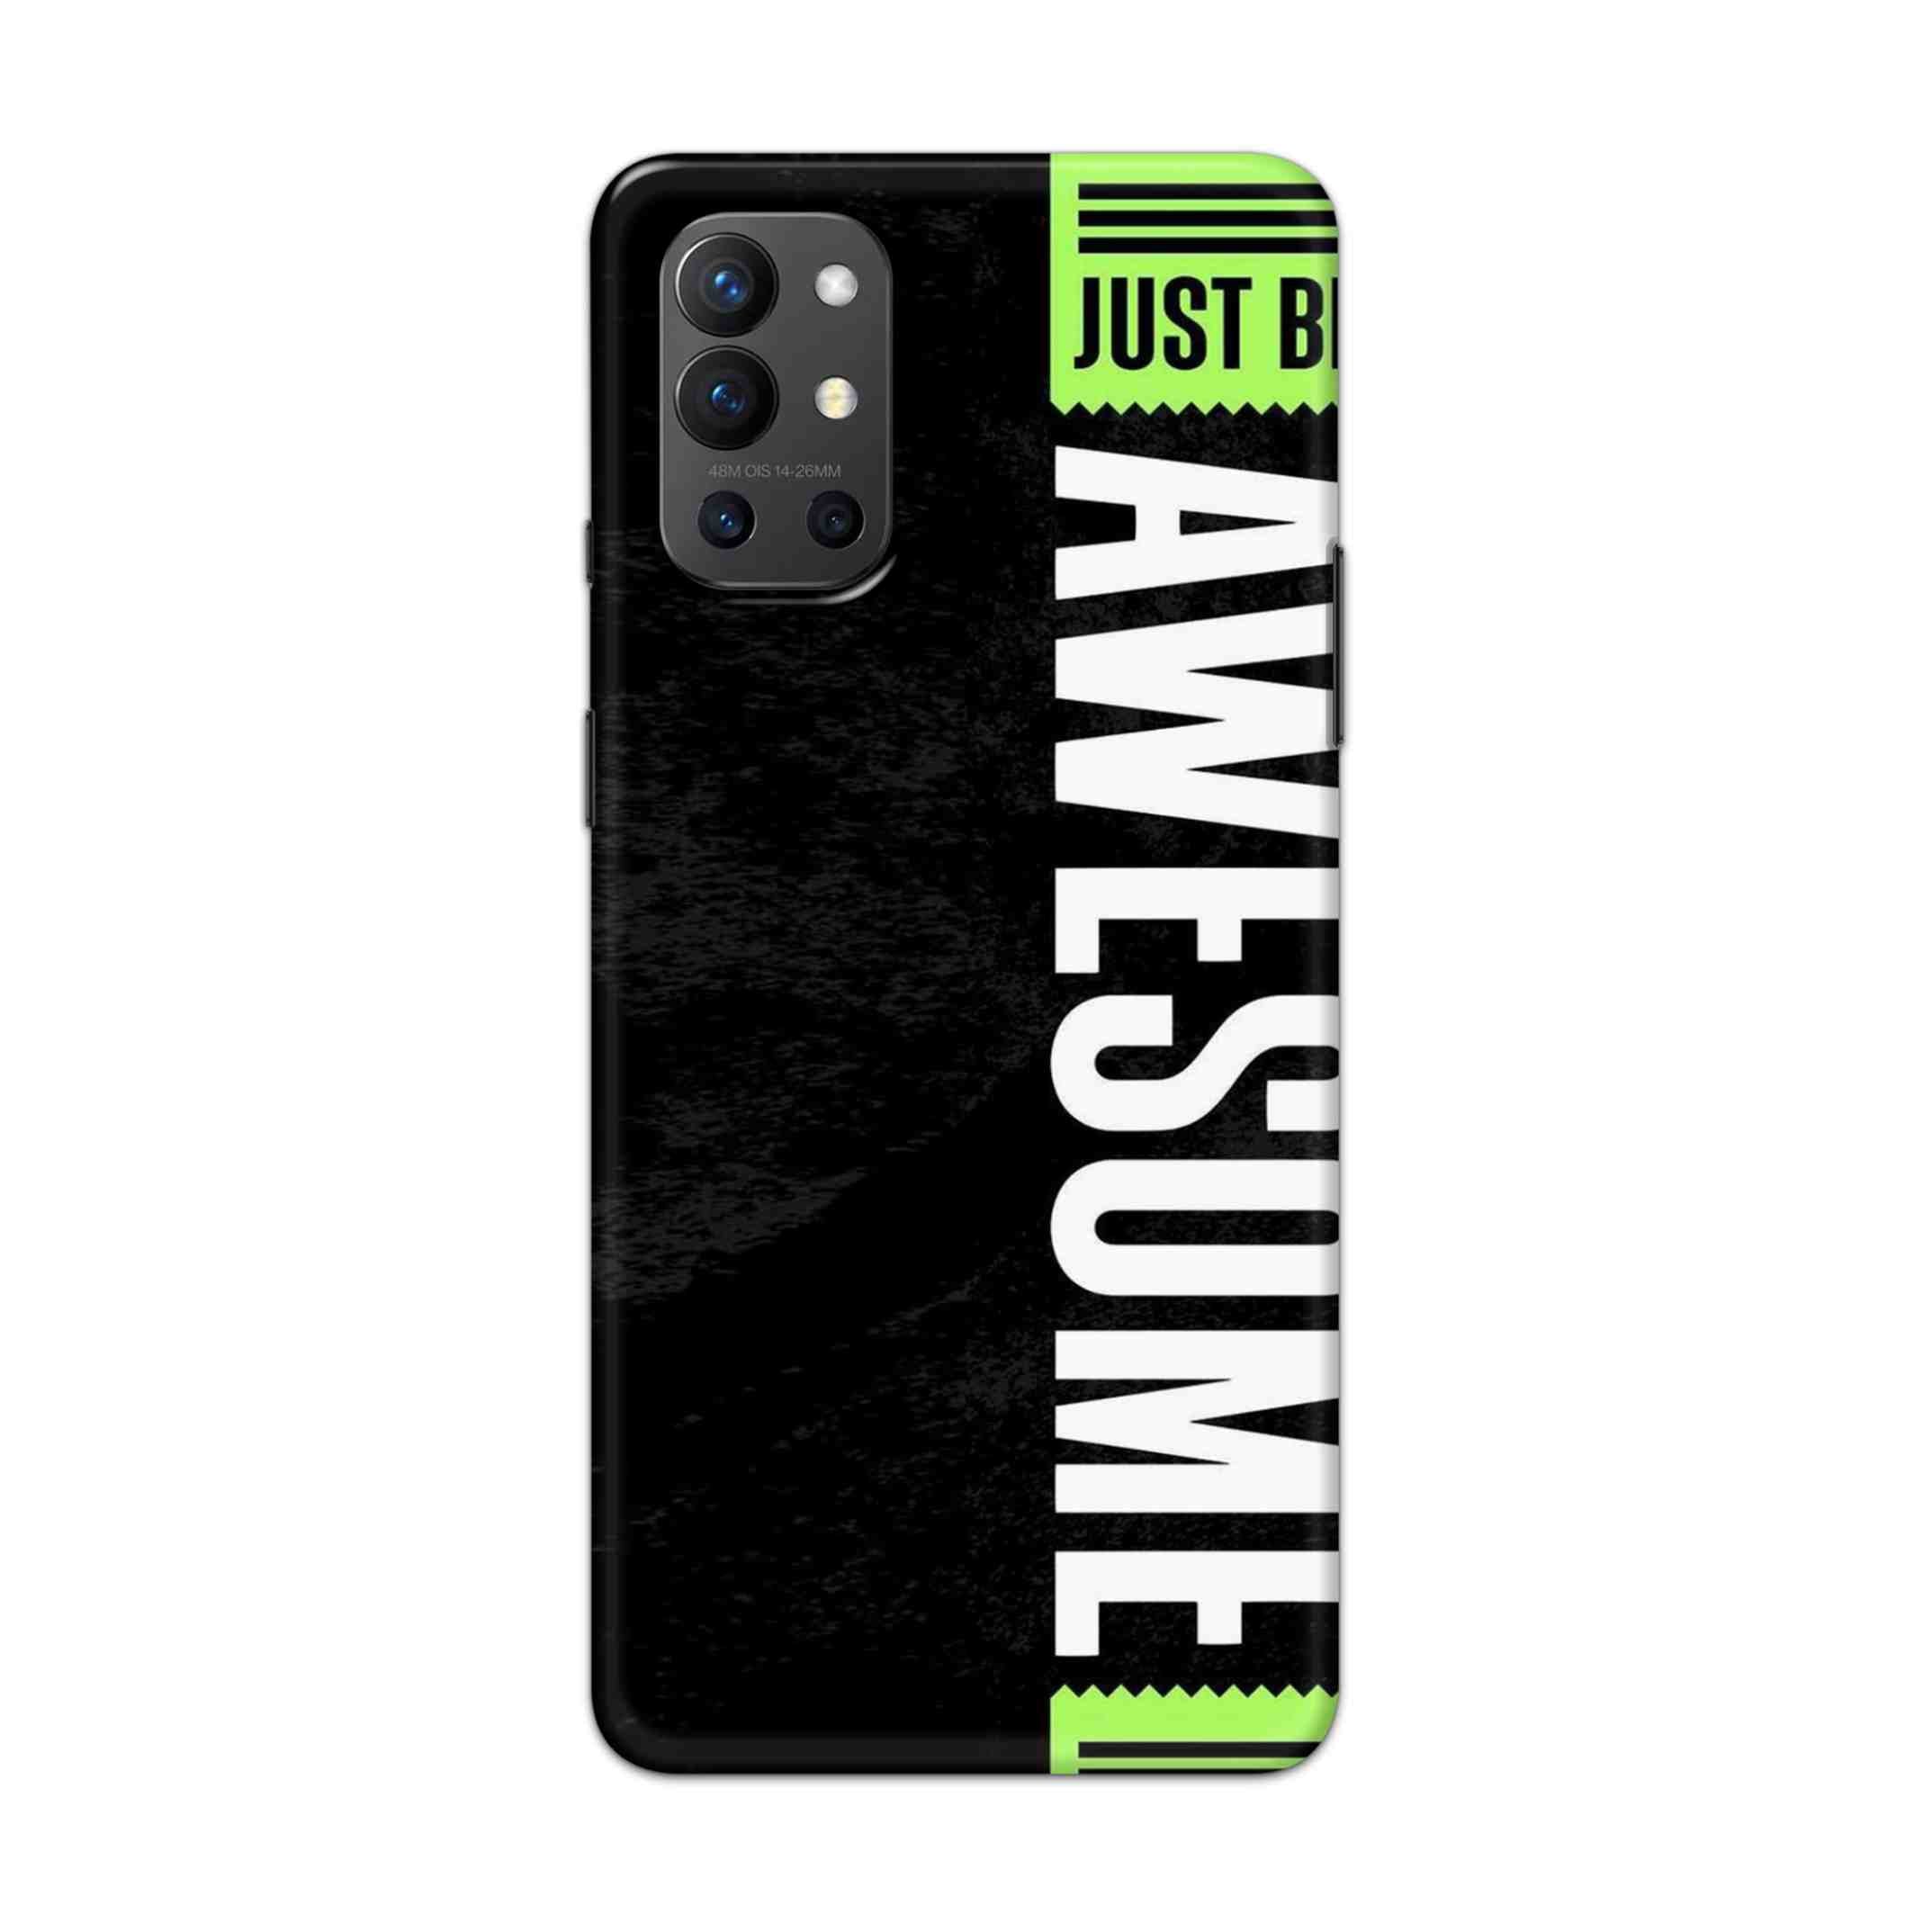 Buy Awesome Street Hard Back Mobile Phone Case Cover For OnePlus 9R / 8T Online